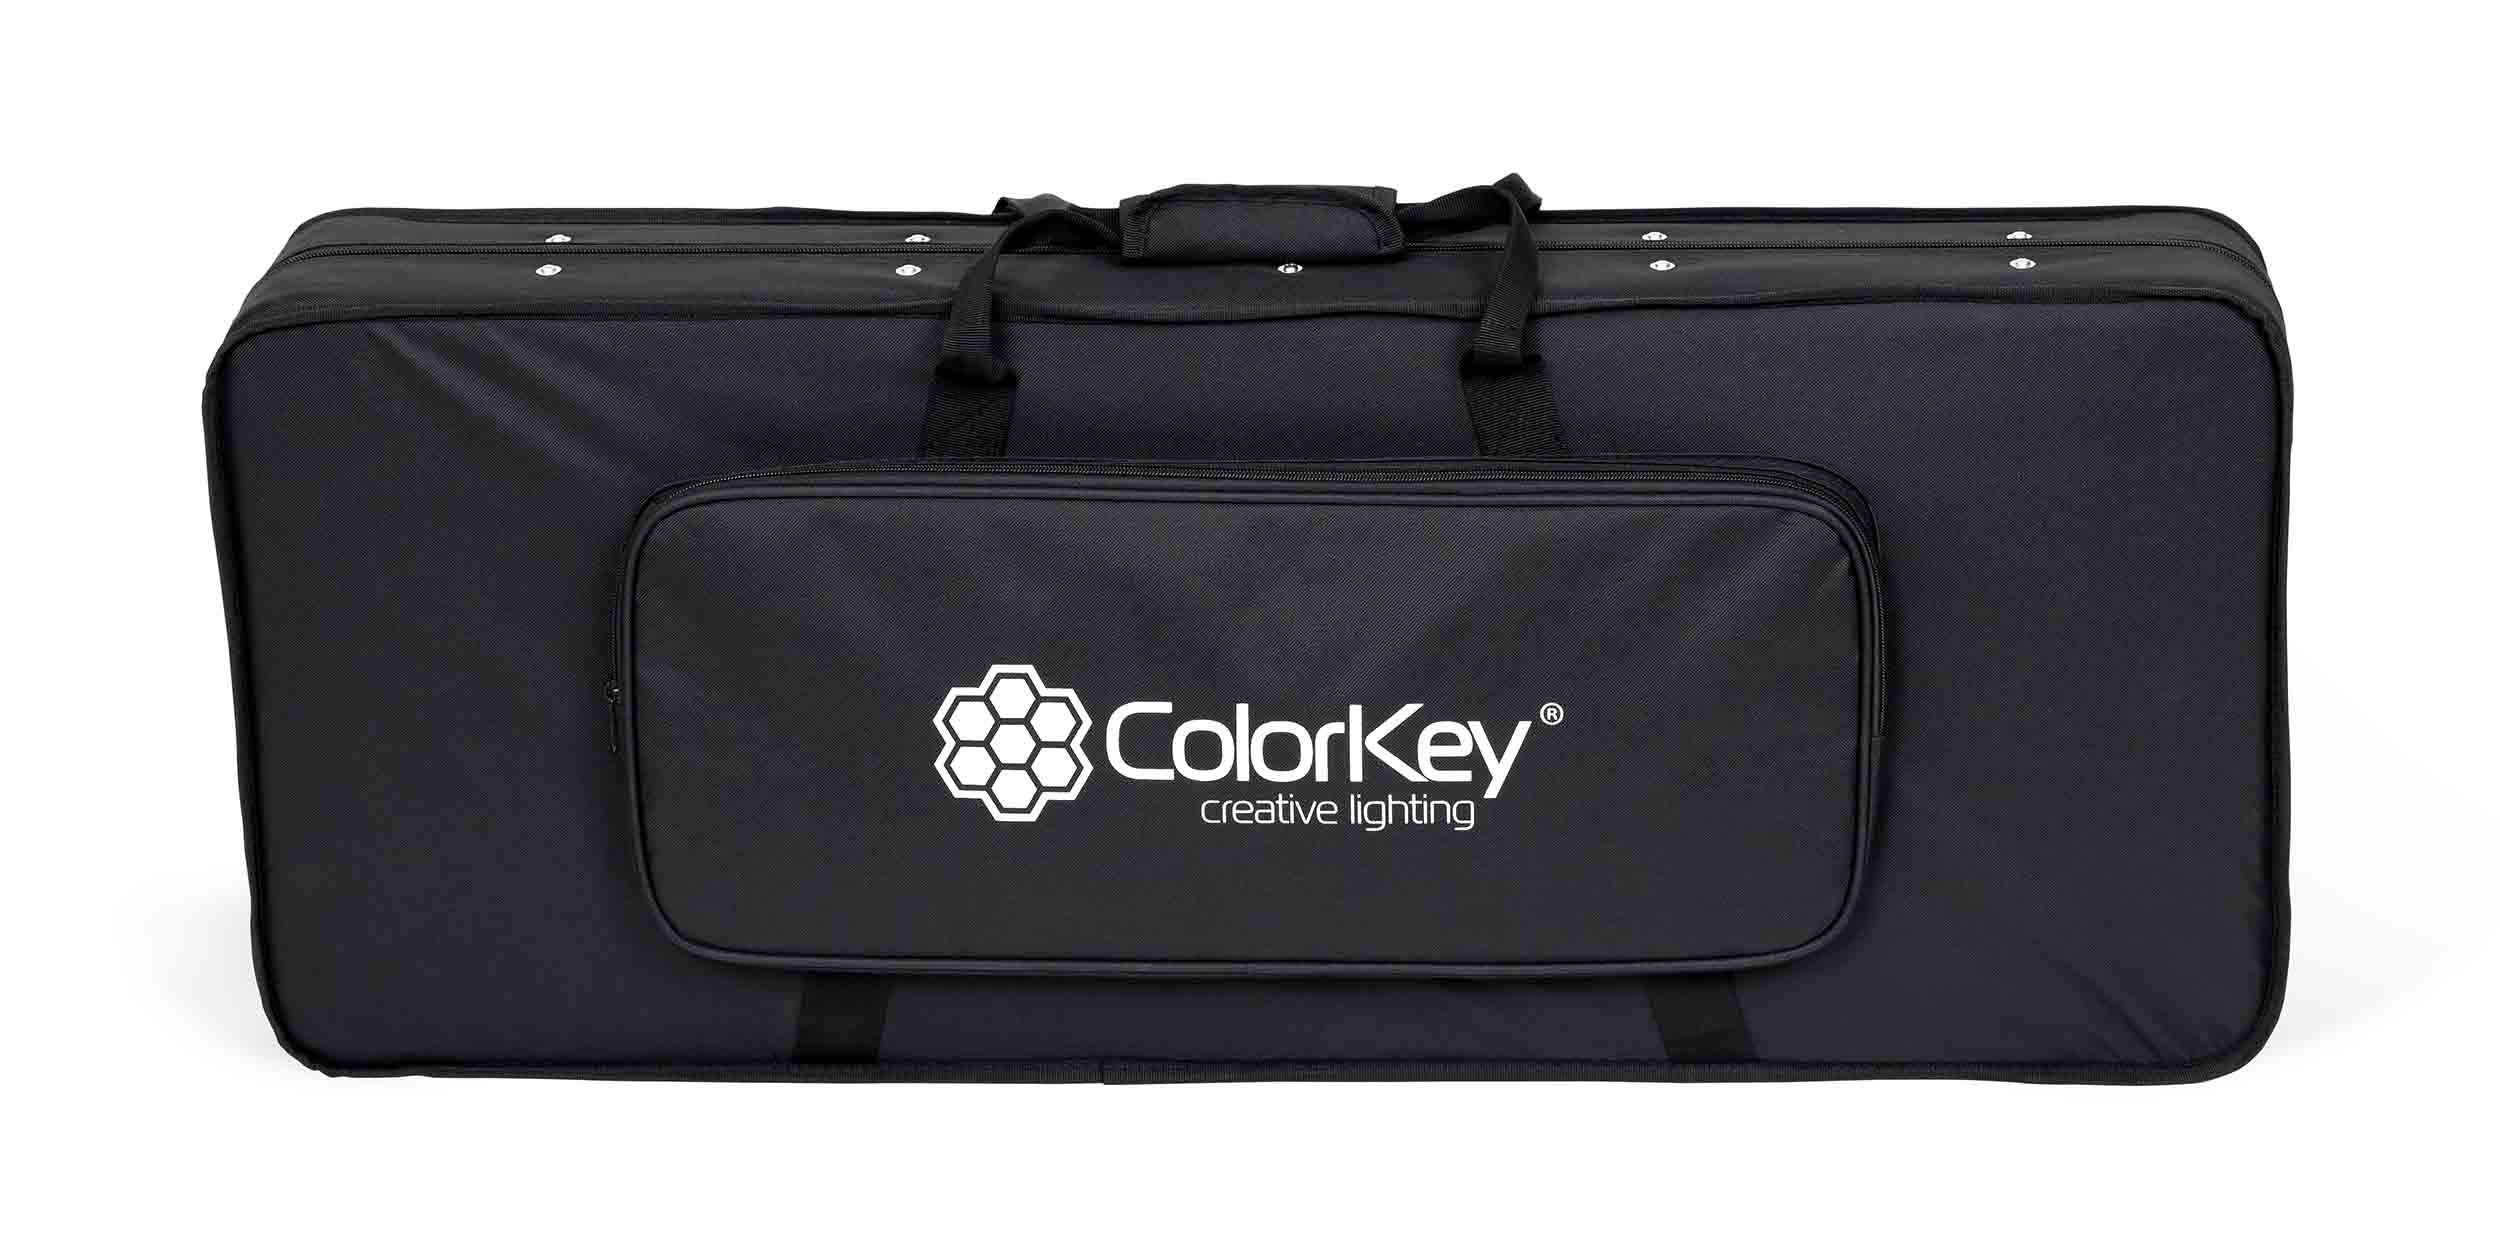 Colorkey CKU-3060, Battery-Powered Lighting Package with Stand and Carrying Case by ColorKey